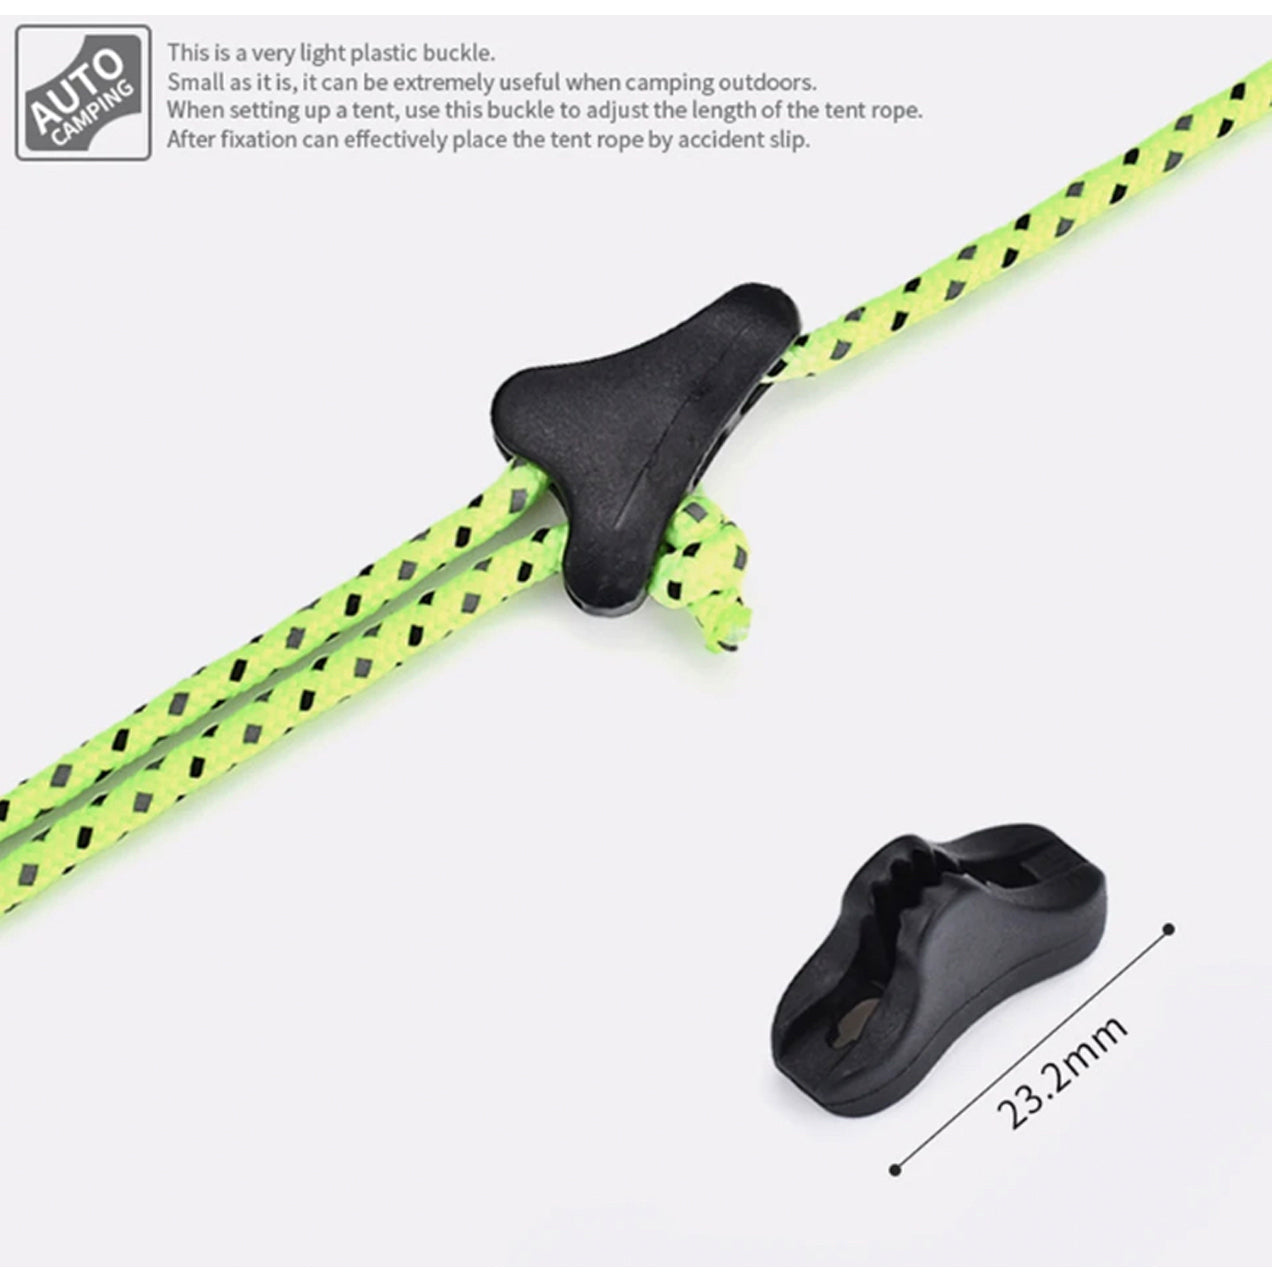 Rope Tension Clips are great for putting tension on tent ropes, hootchies and other outdoor shelters. Specifically designed for smaller paracord, rope and hootchie cord, these clips are a must out in the field. Military, cadets, camping and other outdoor adventurers will find these small clips very handy. www.defenceqstore.com.au